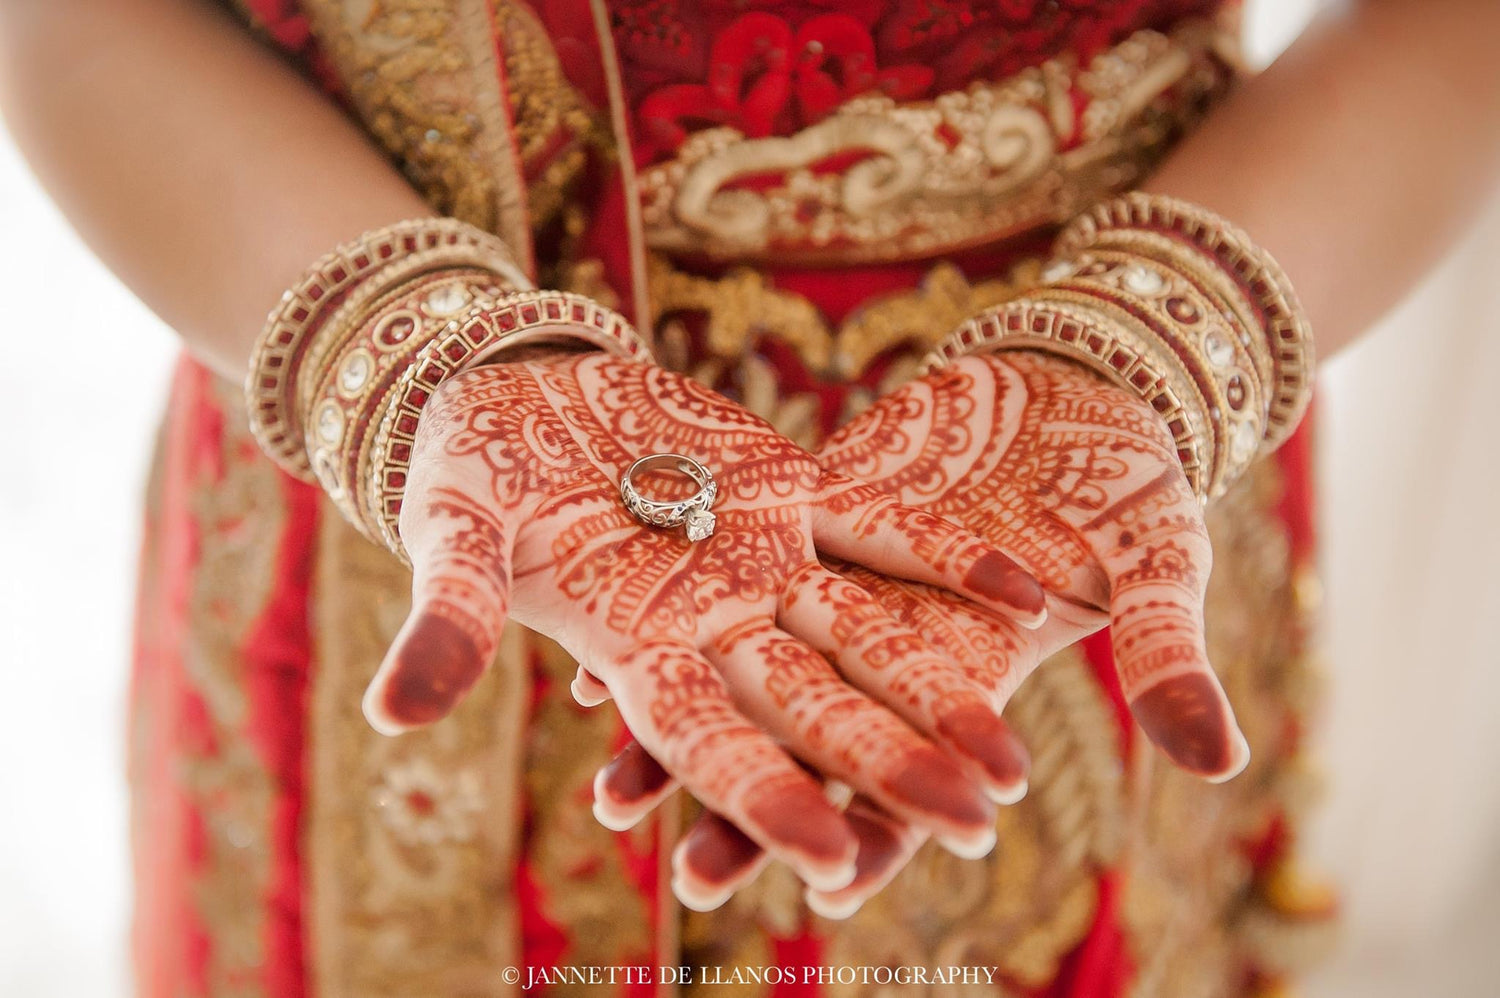 A Guide on the Traditions and Symbolism of Wedding Rings in Various Cultures